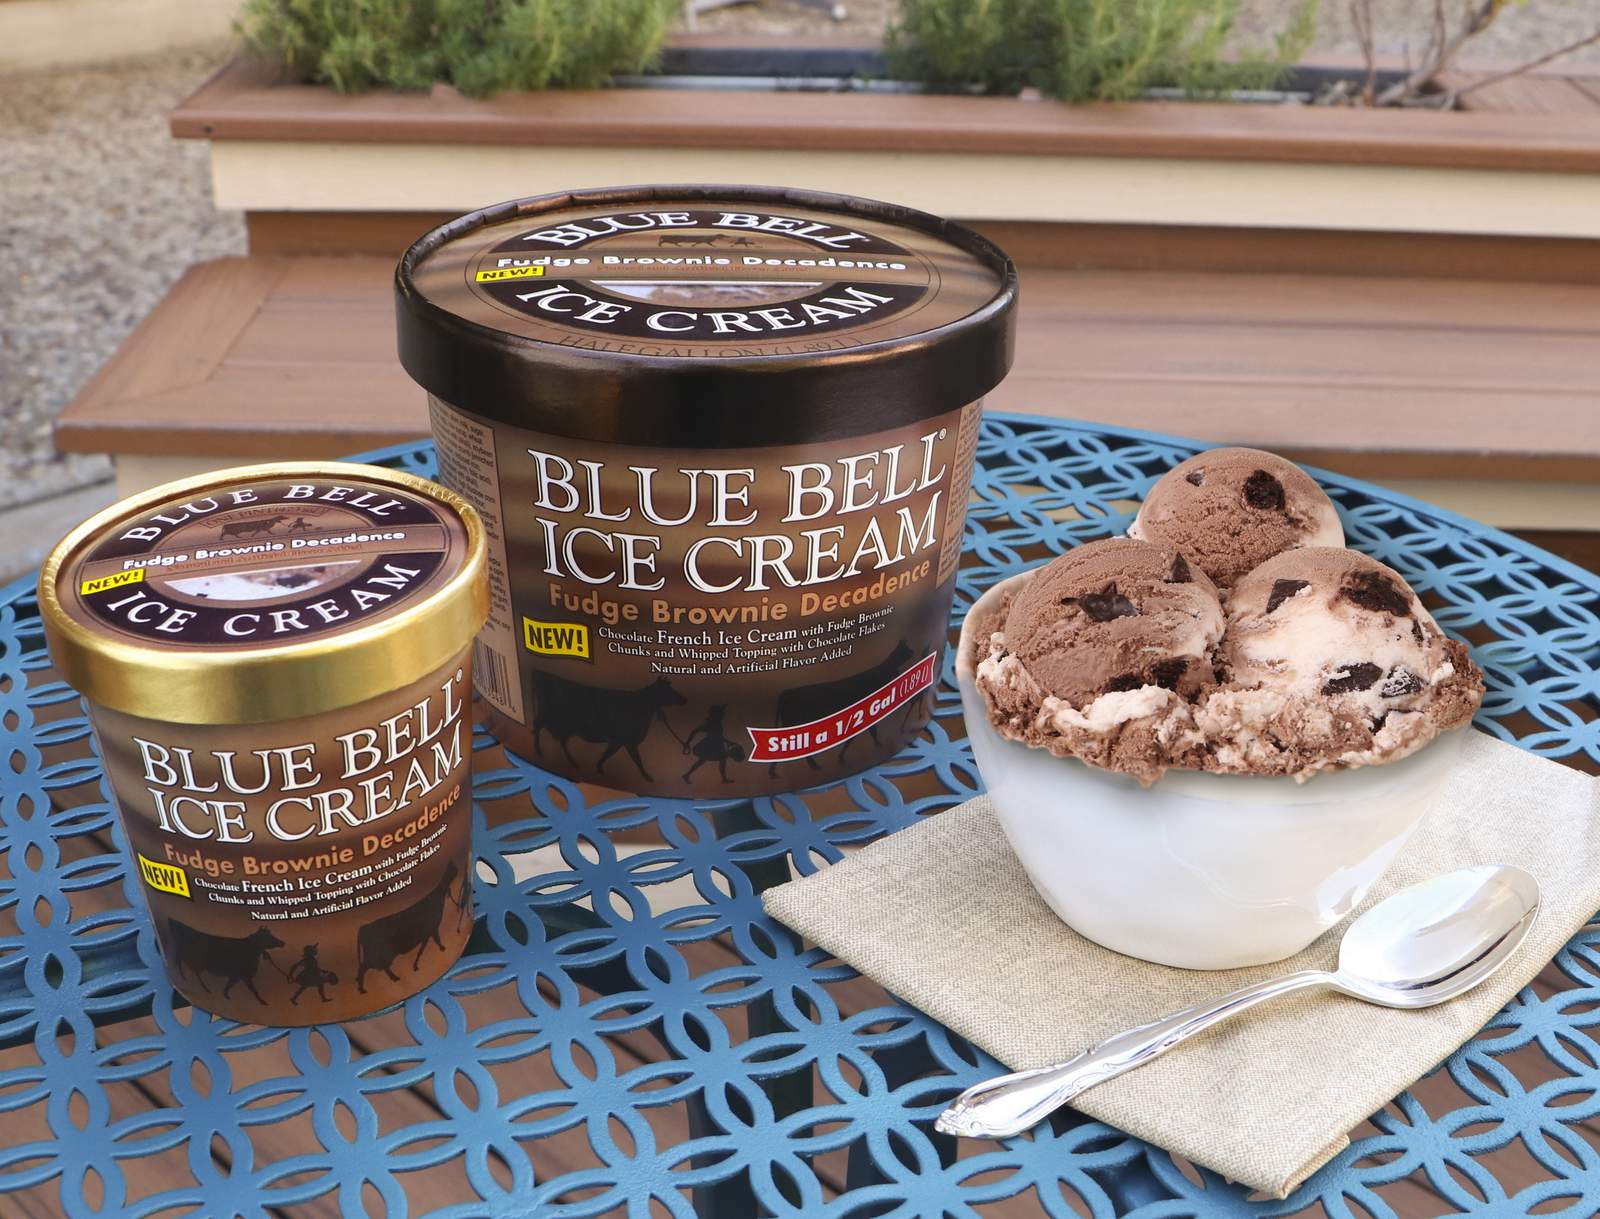 Chocolate lovers, rejoice! Blue Bell releases newest flavor, Fudge Brownie Decadence